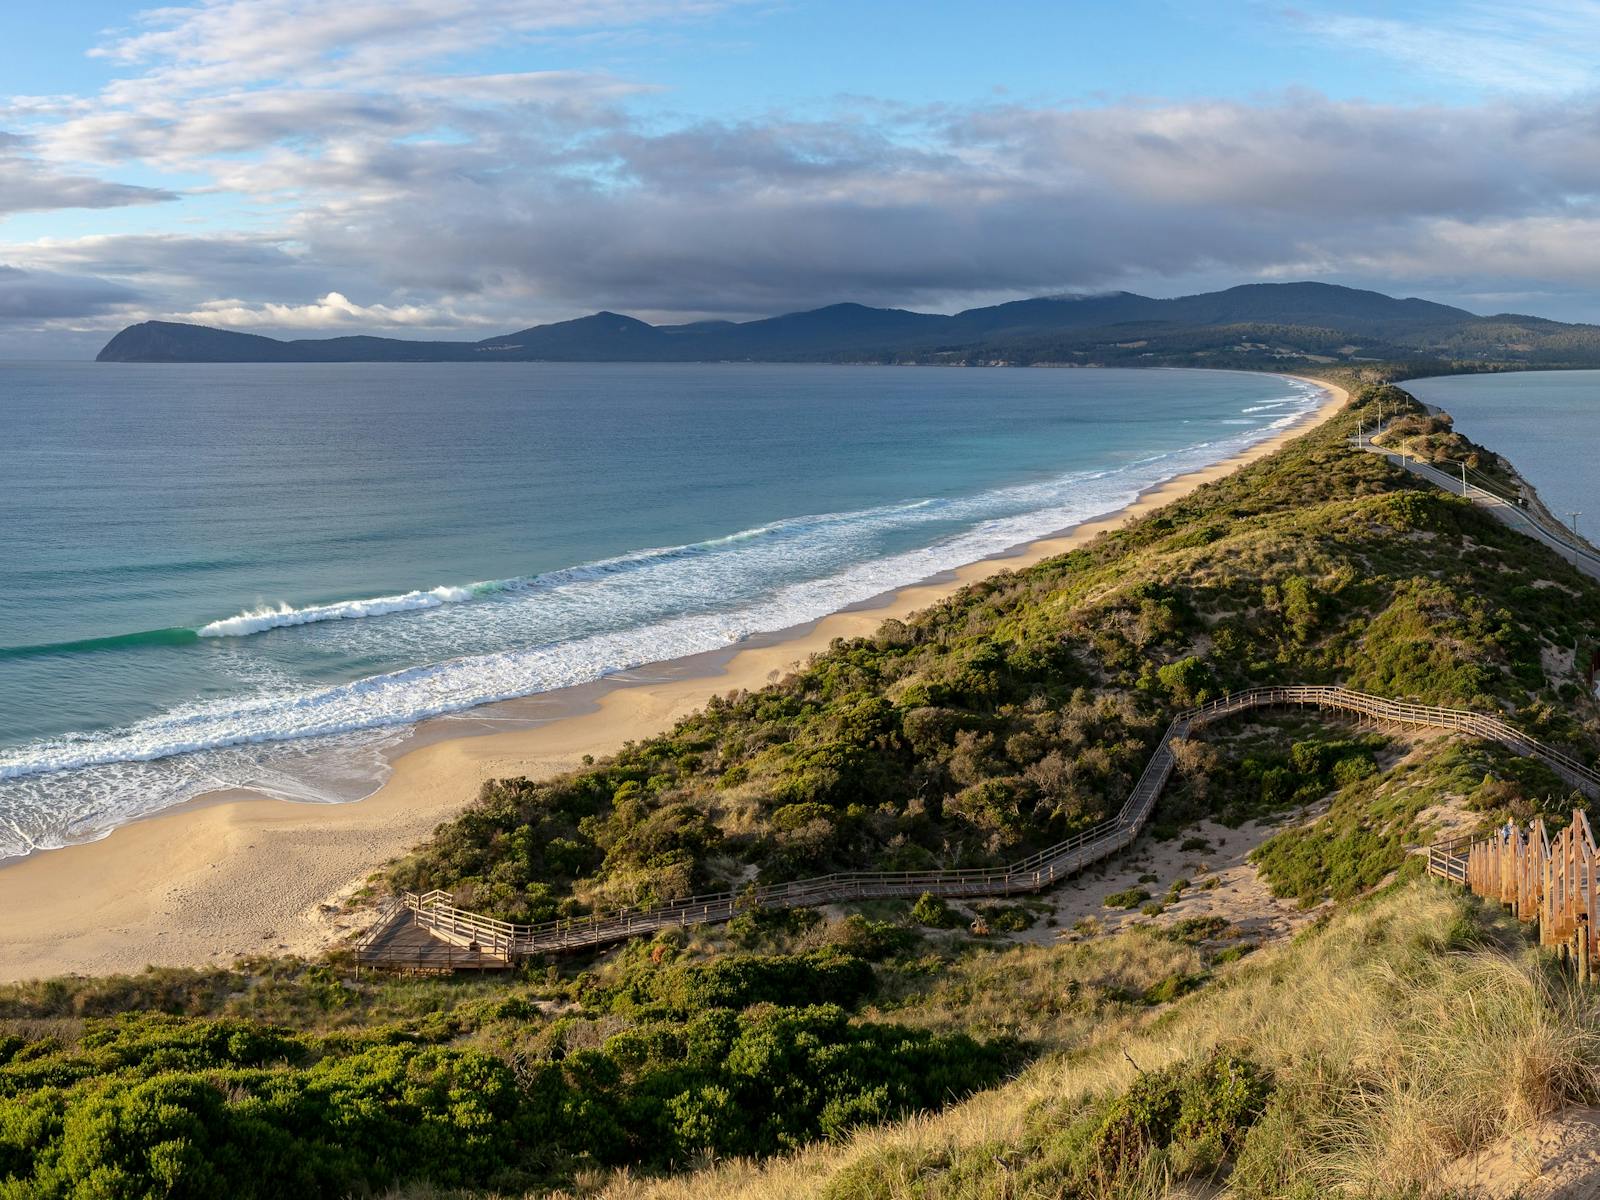 Panoramic view from the Neck lookout at Bruny Island. Water surrounding a thin strip of land.